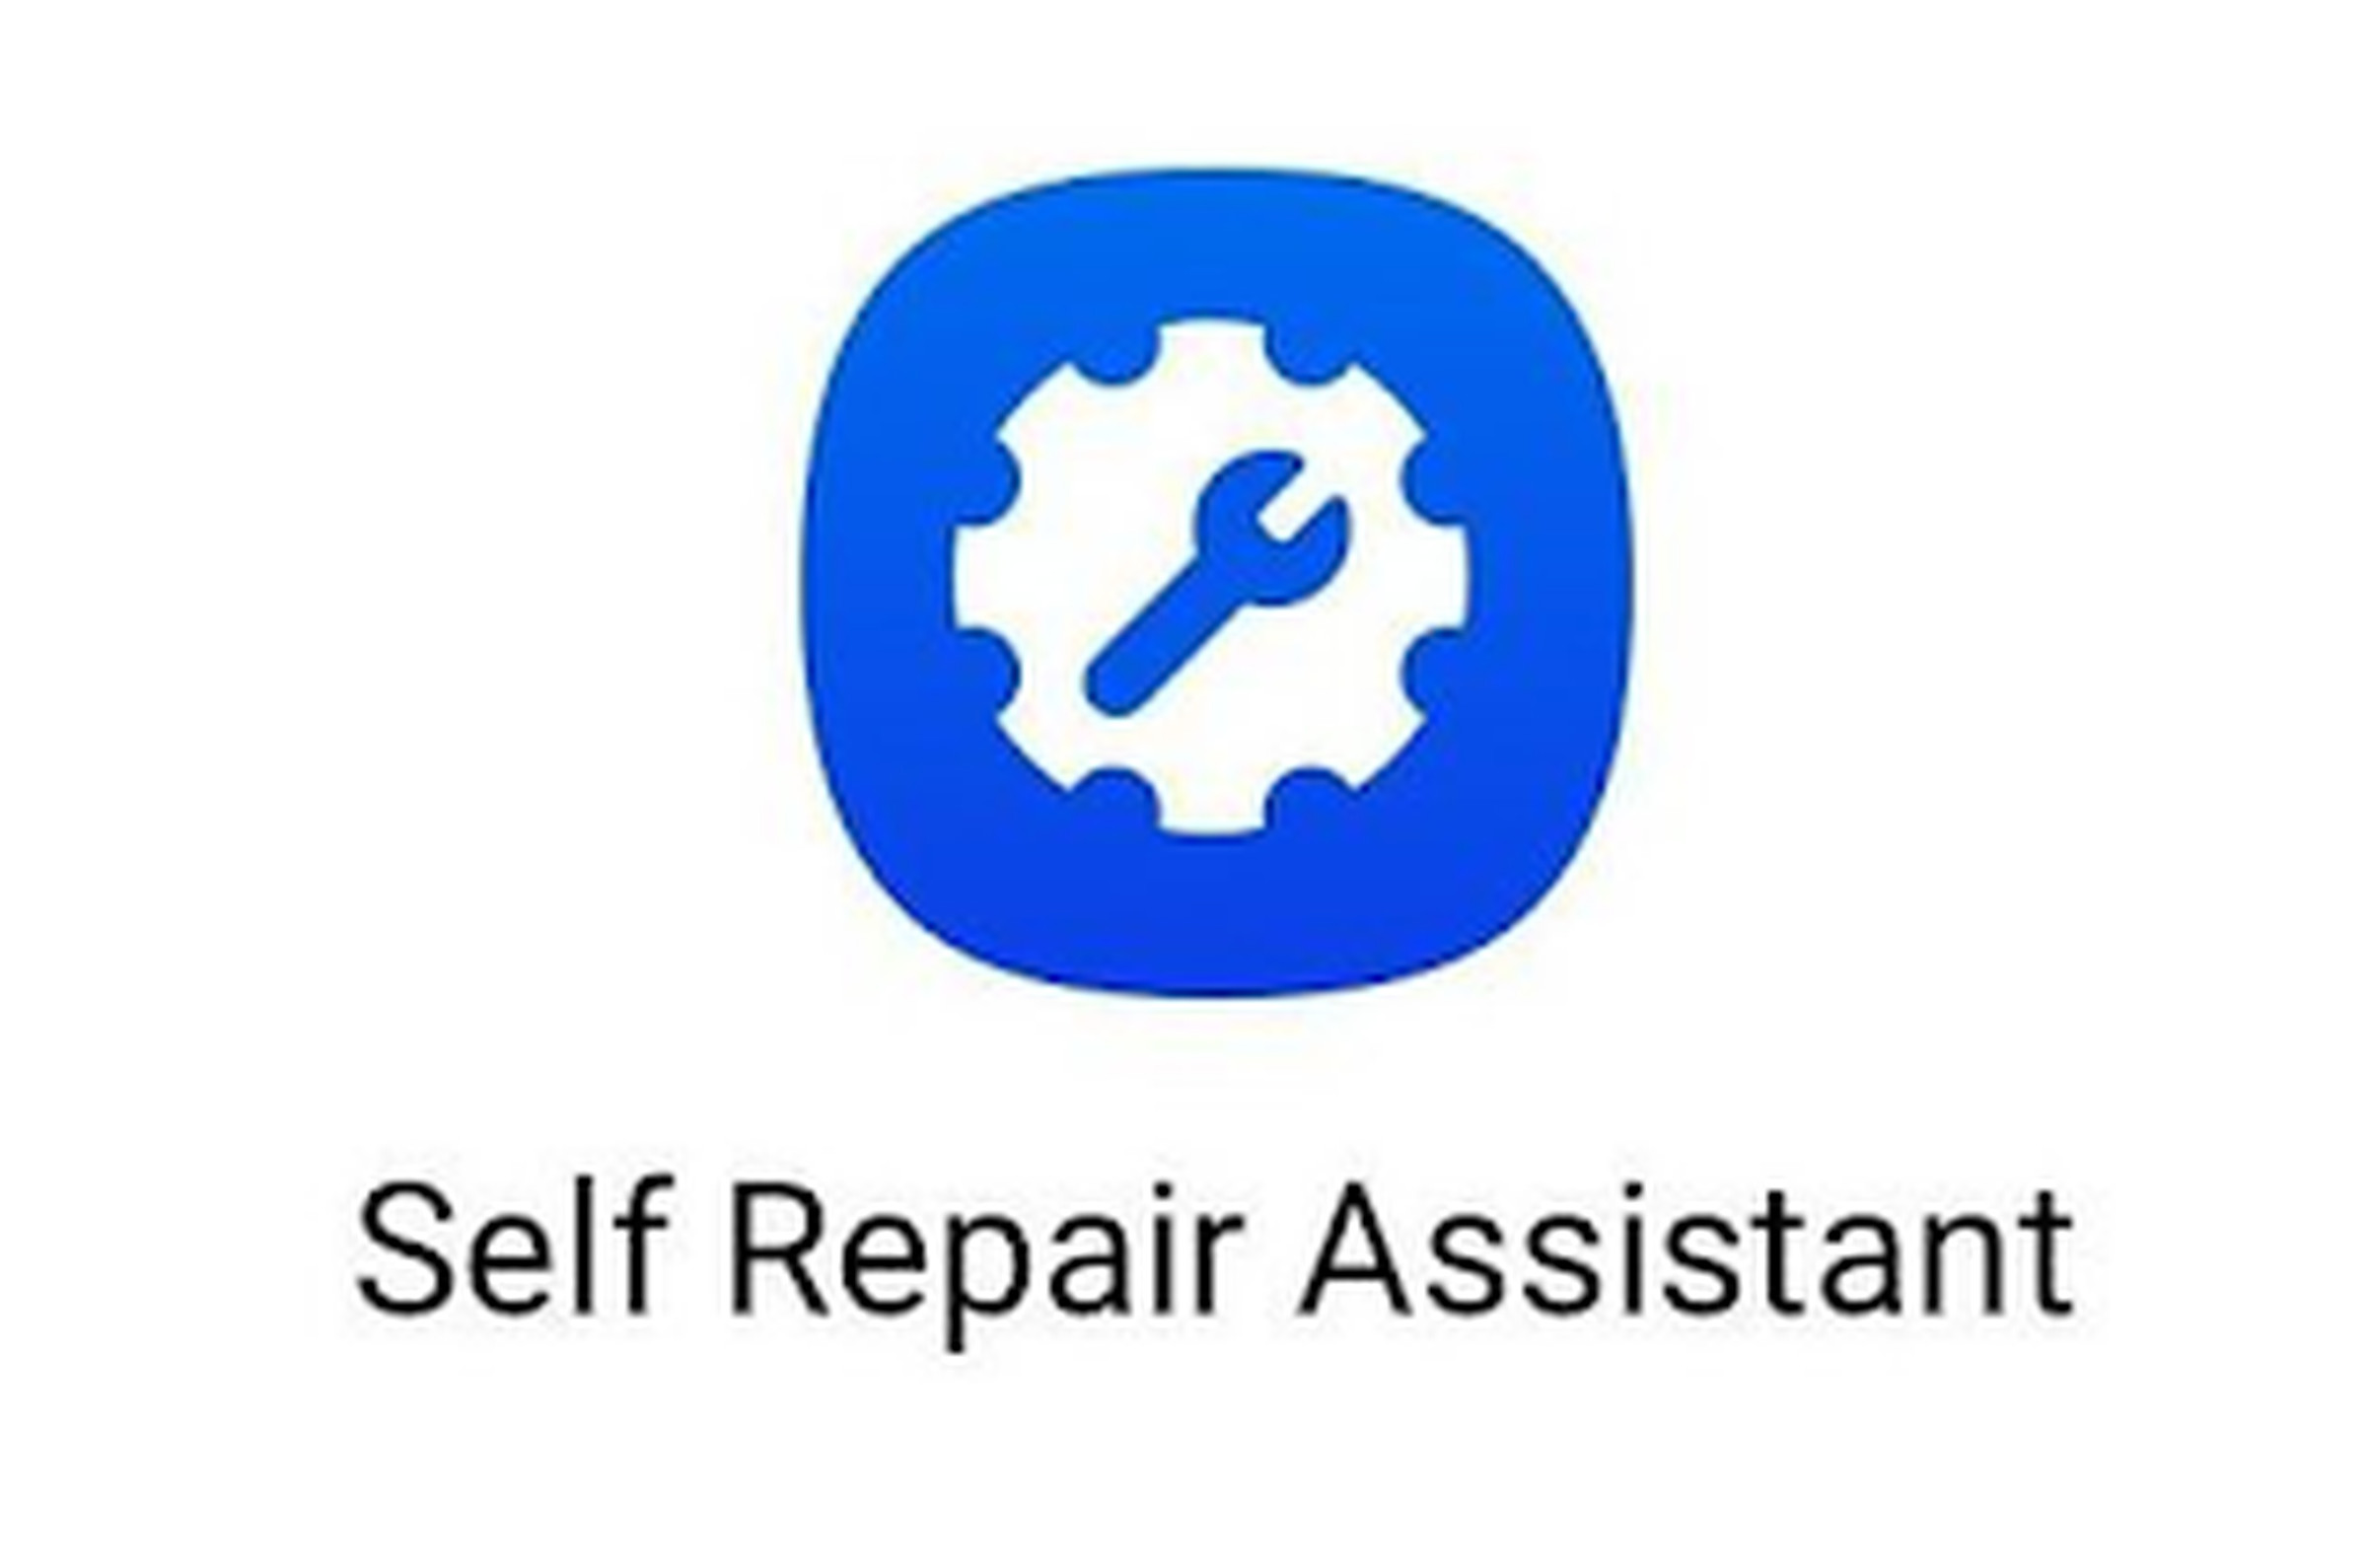 The icon for Samsung’s purported “Self Repair Assistant” app.